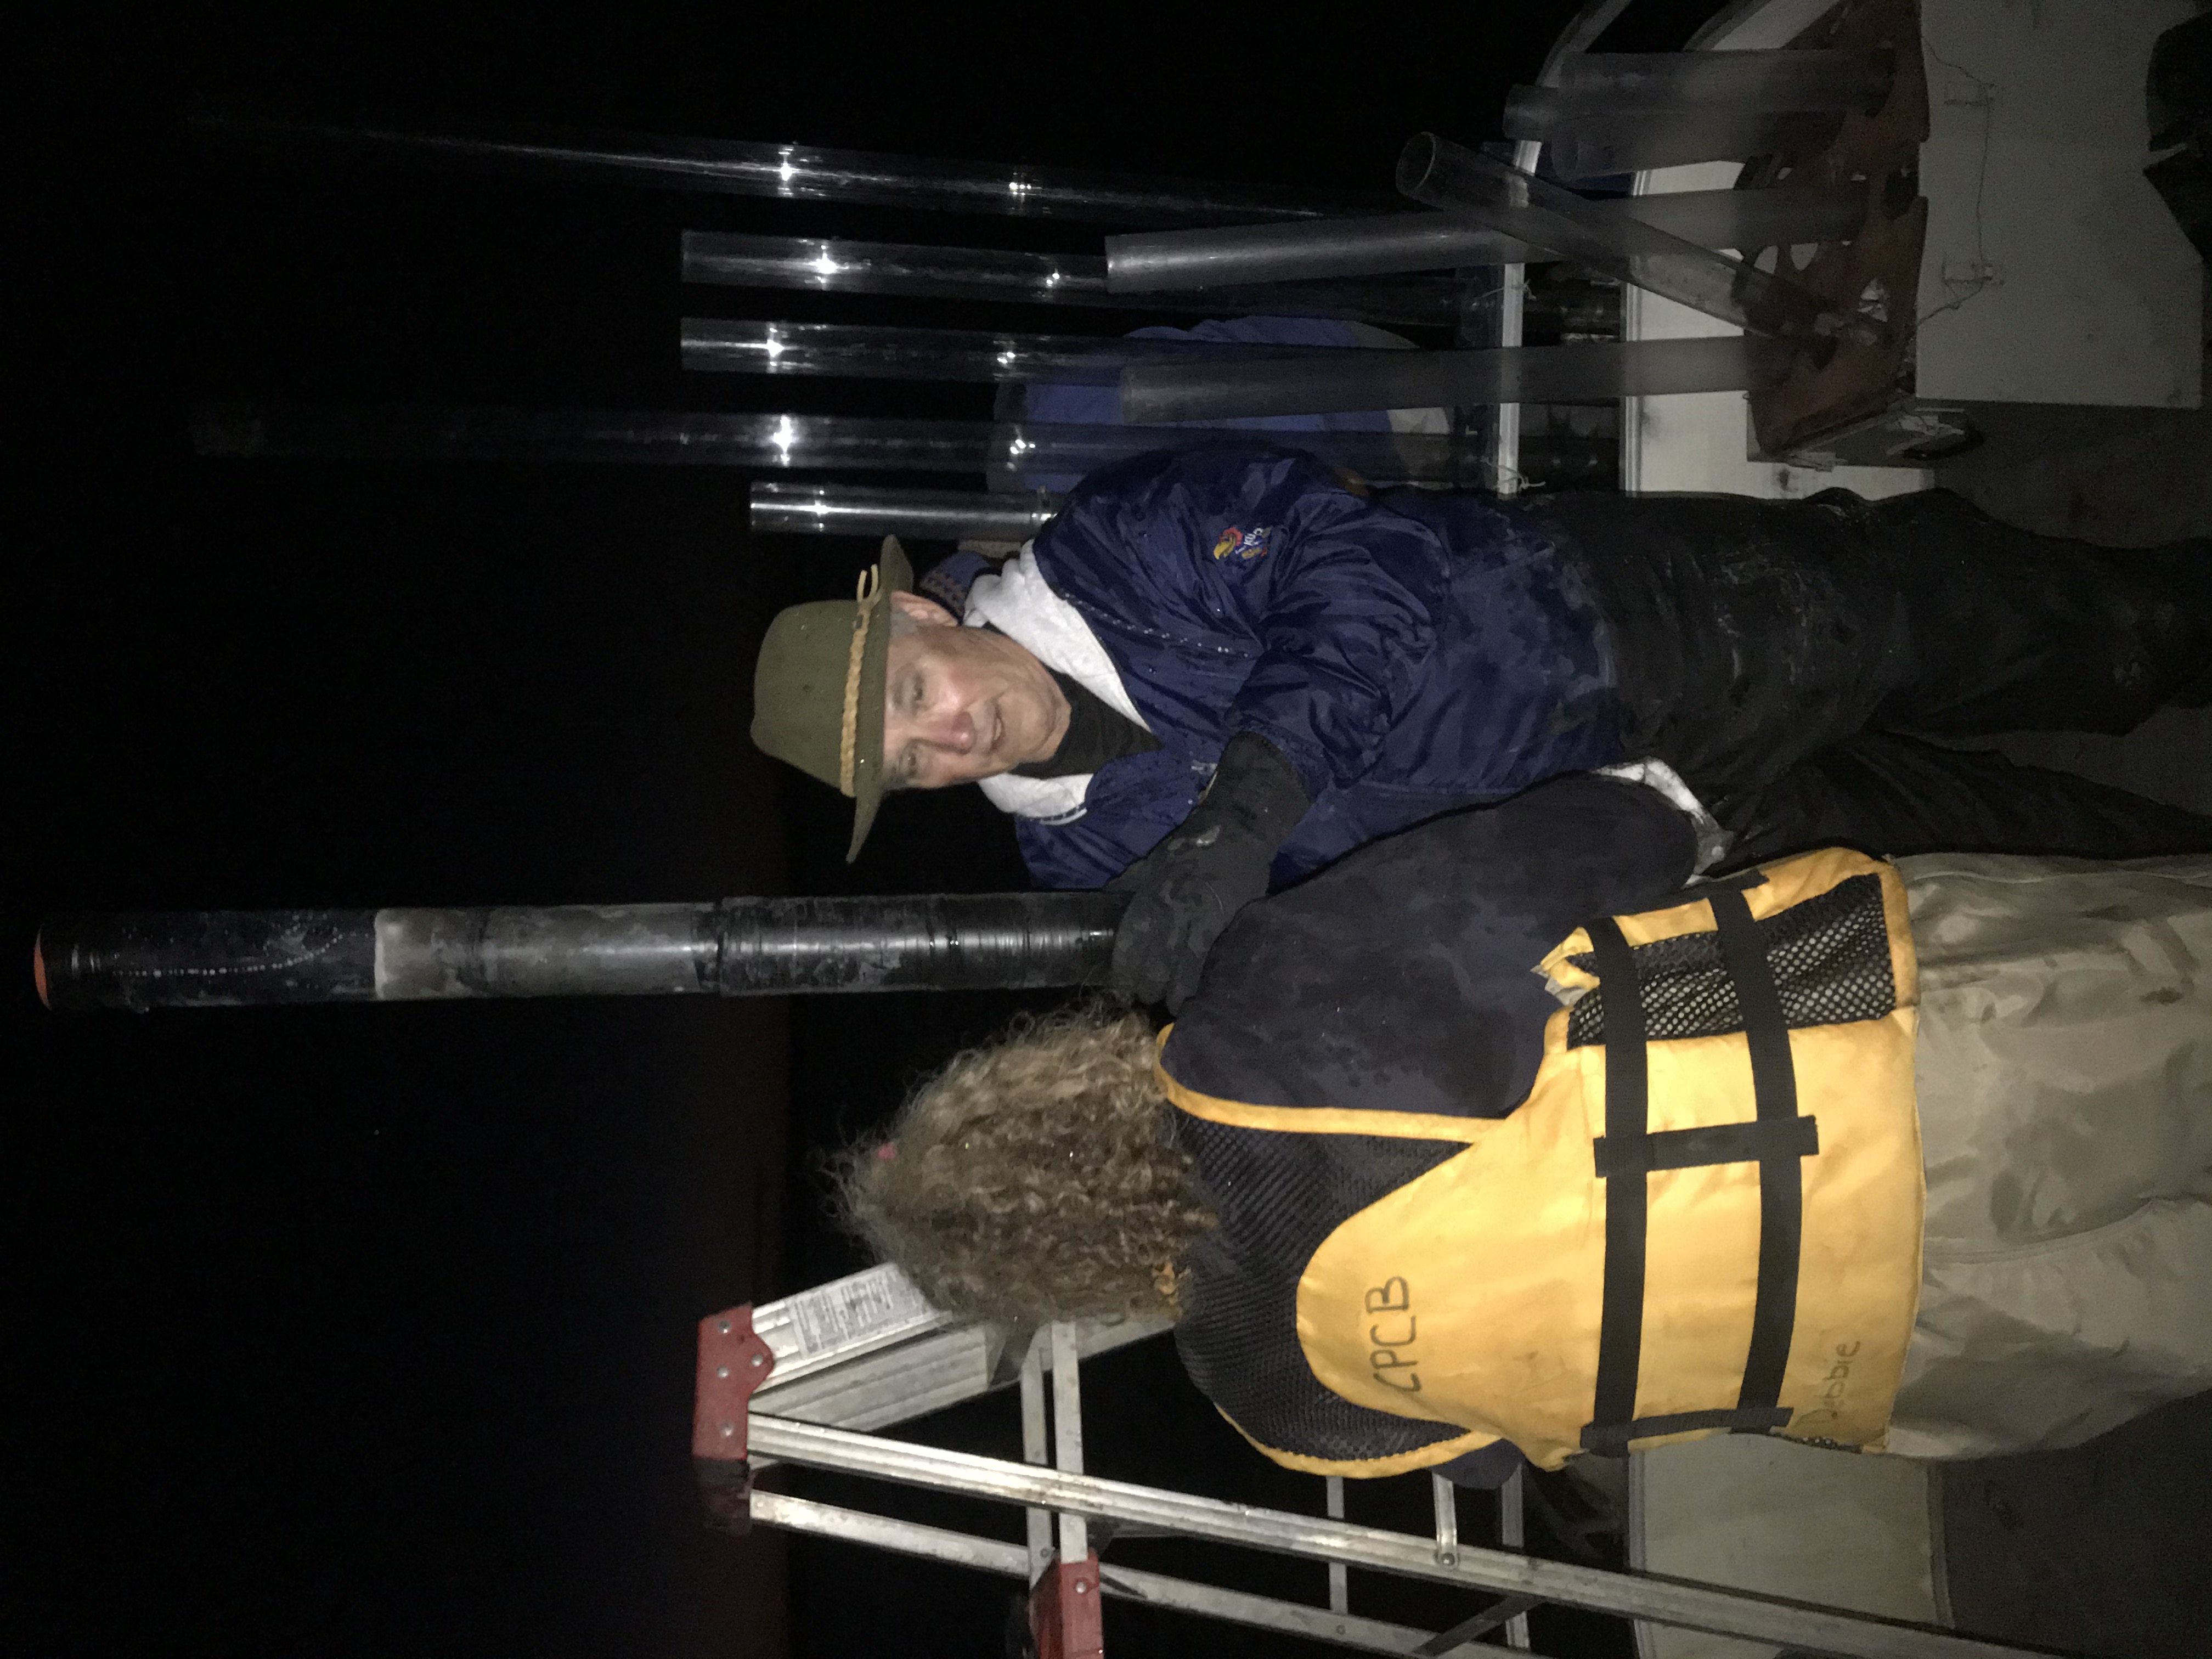 "Jennifer Delisle and Scott Campbell hold a sediment core they collected from Kanopolis lake at night due to high winds during the day."